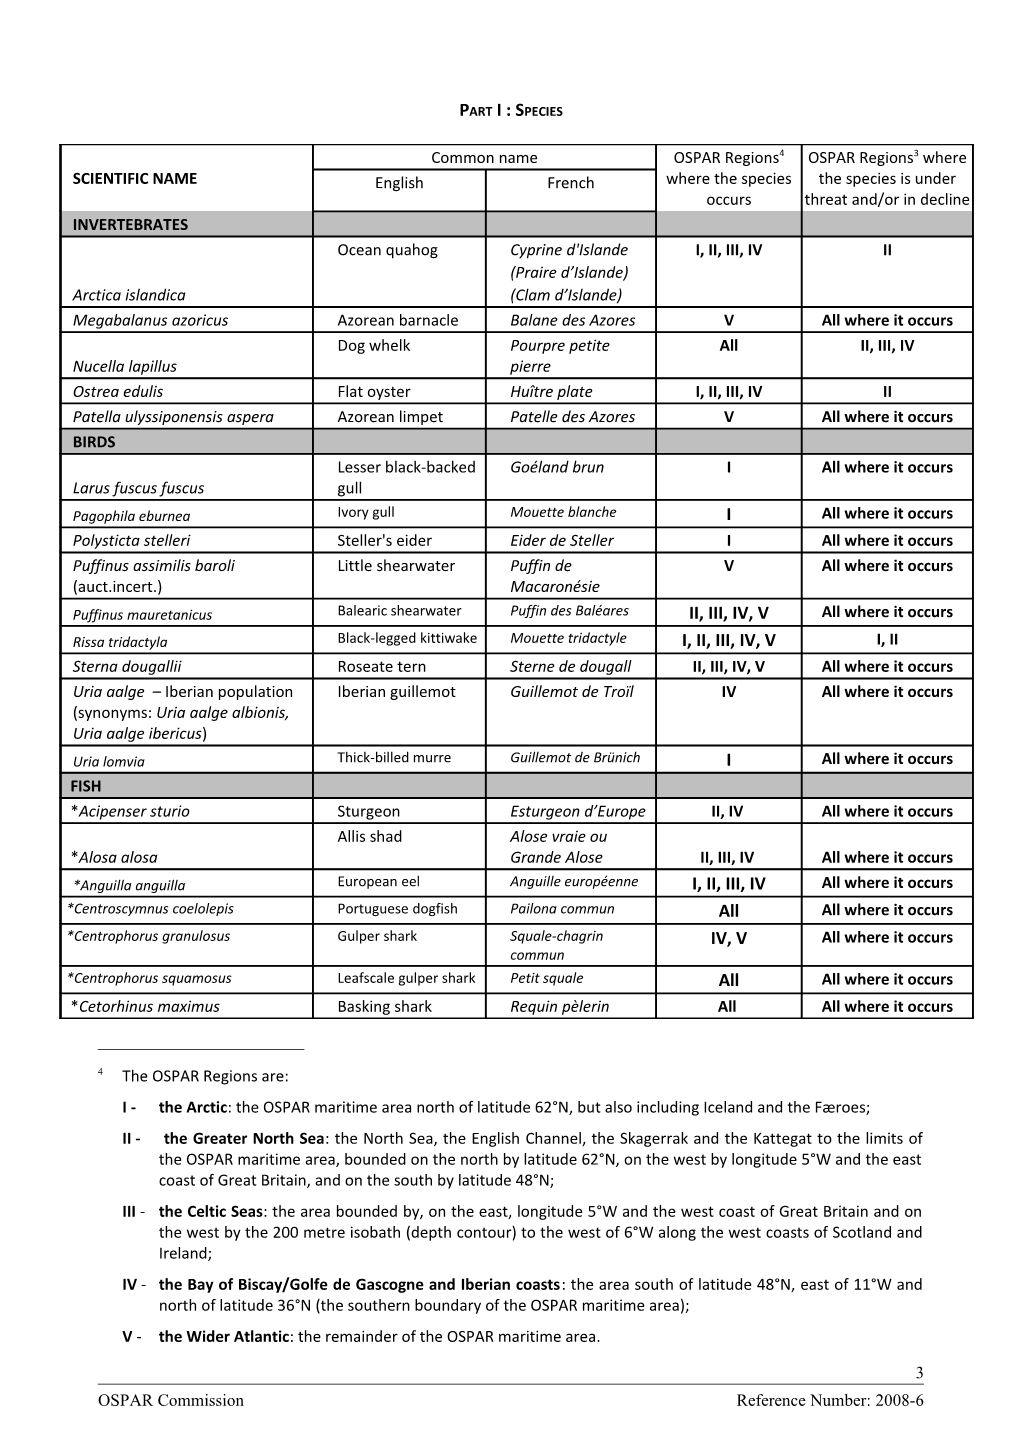 OSPAR List of Threatened And/Or Declining Species and Habitats